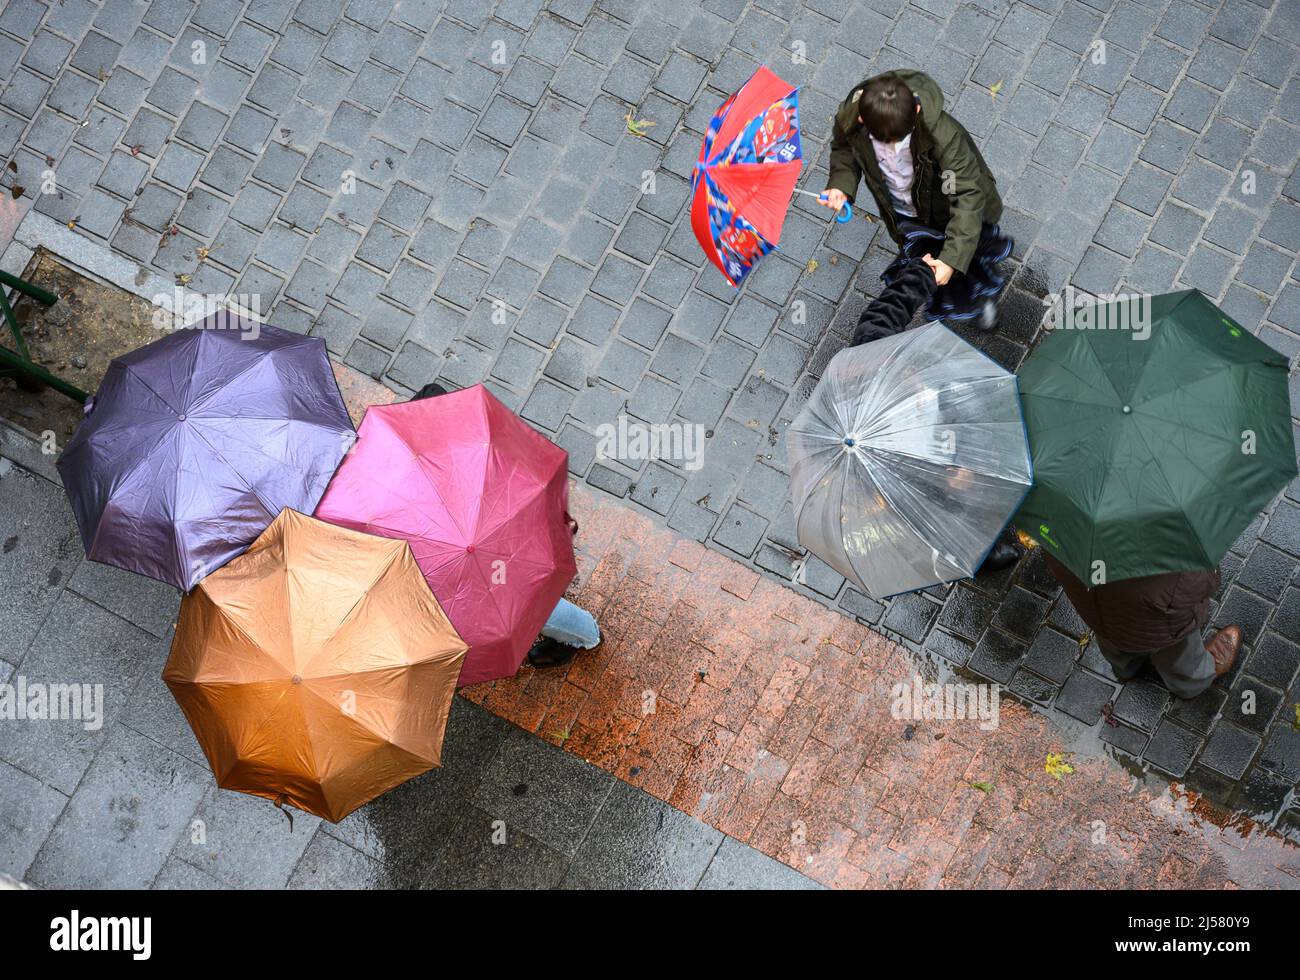 Groups of people talking  under umbrellas on a rainy day in Madrid, Spain. Stock Photo